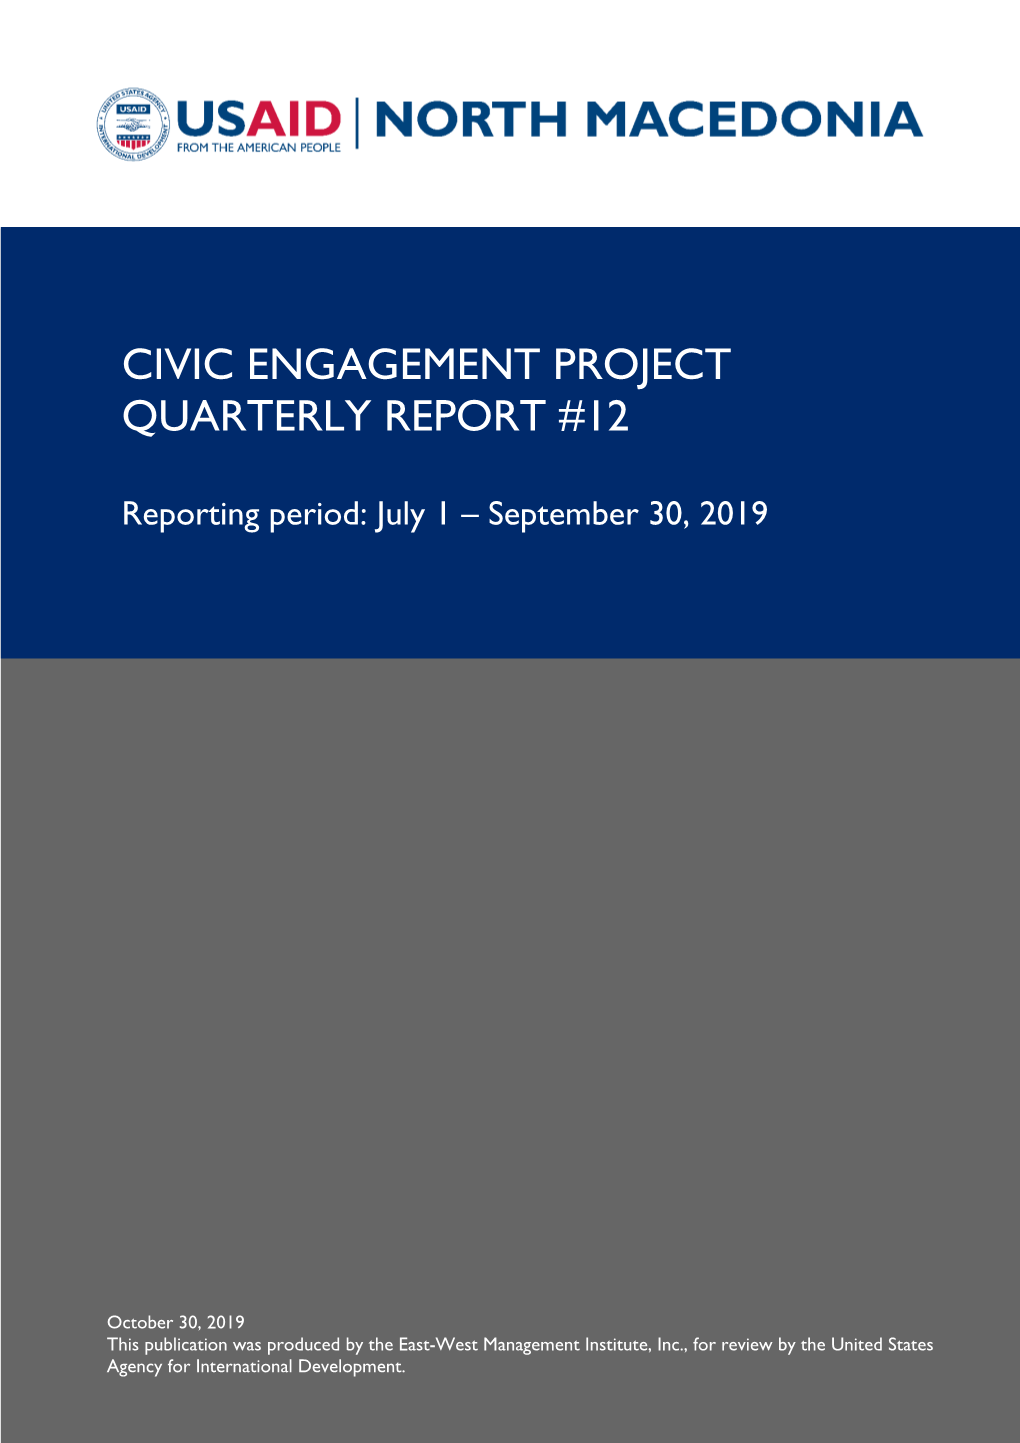 Civic Engagement Project Quarterly Report #12 Quarterly Report #10